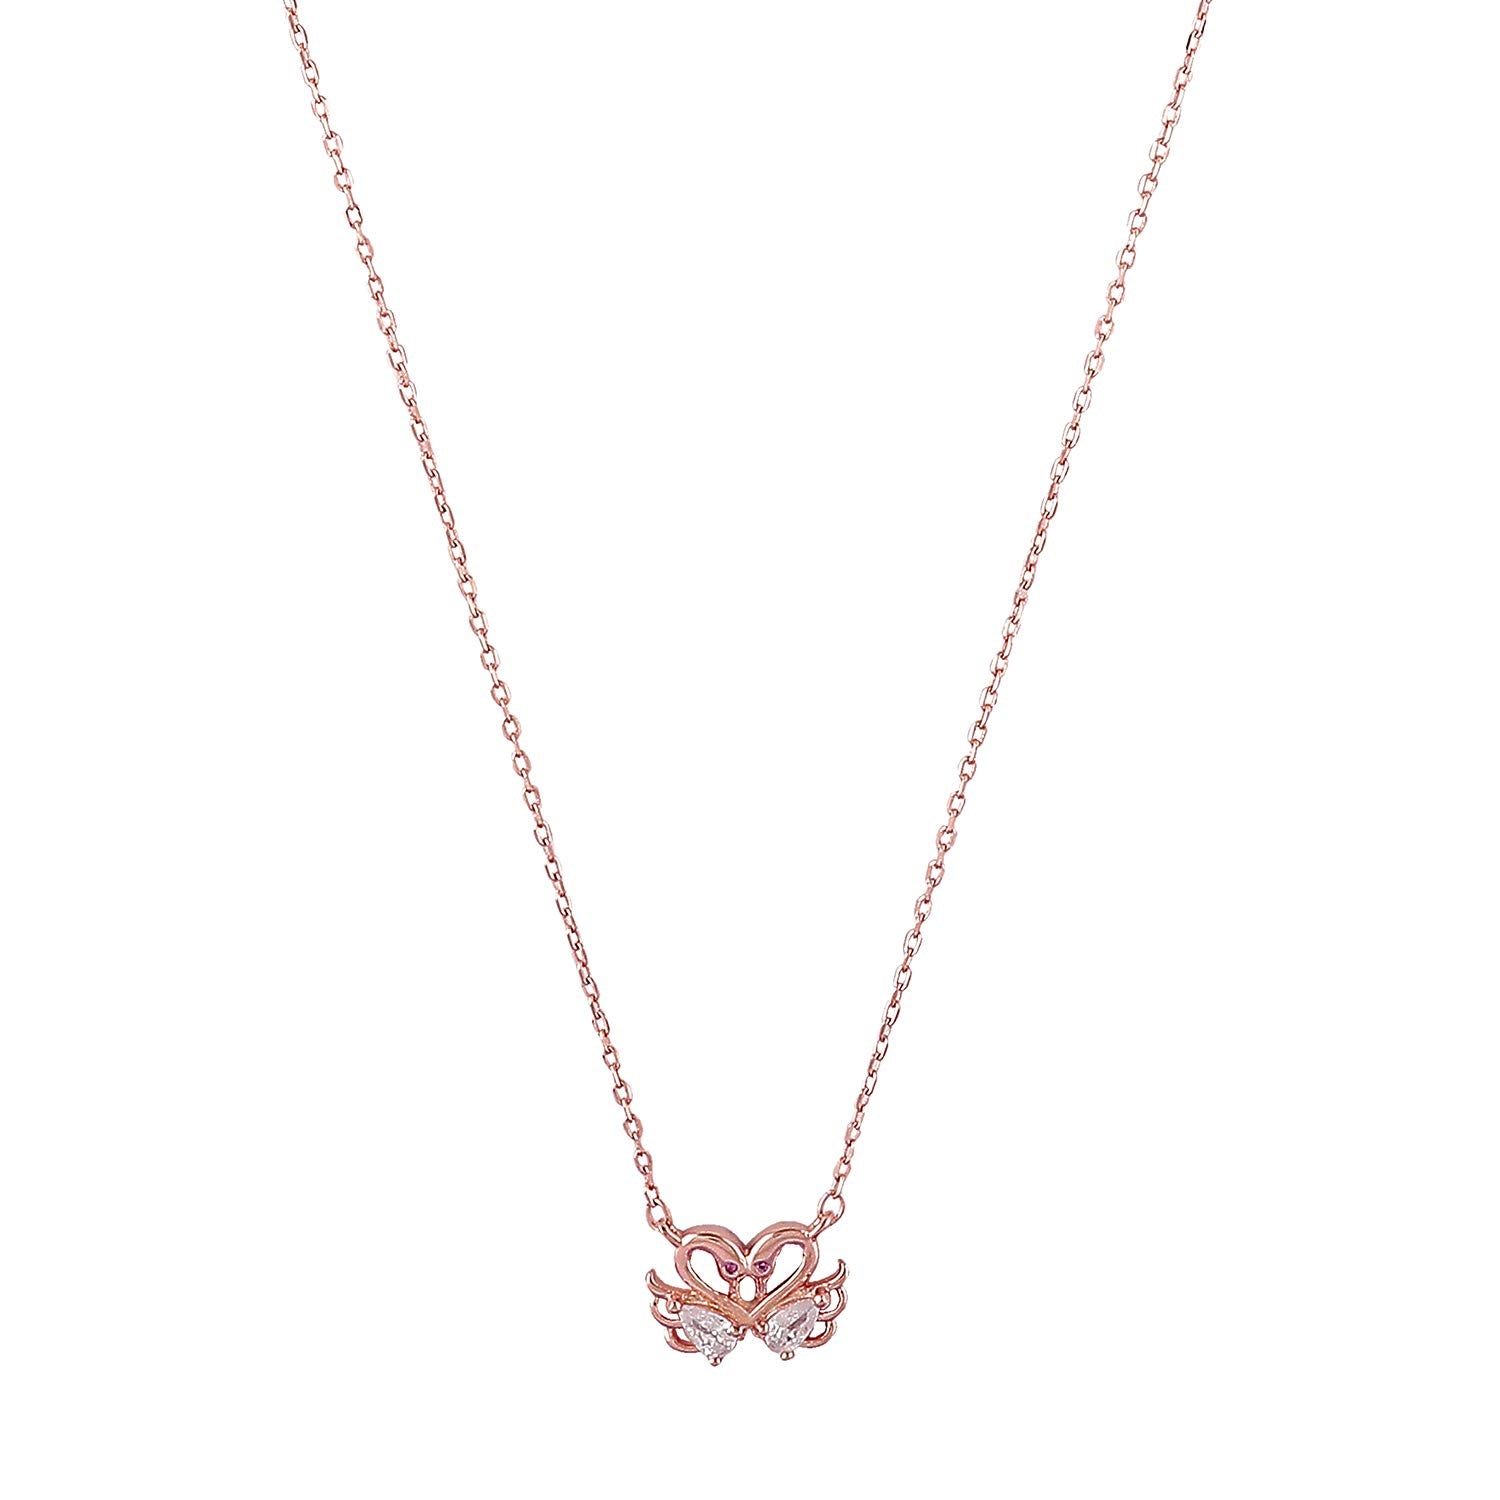 NS0619BJ798RG1-AccessHer 92.5/925 Sterling Silver, rose gold plated swan chain pendant for women and girls